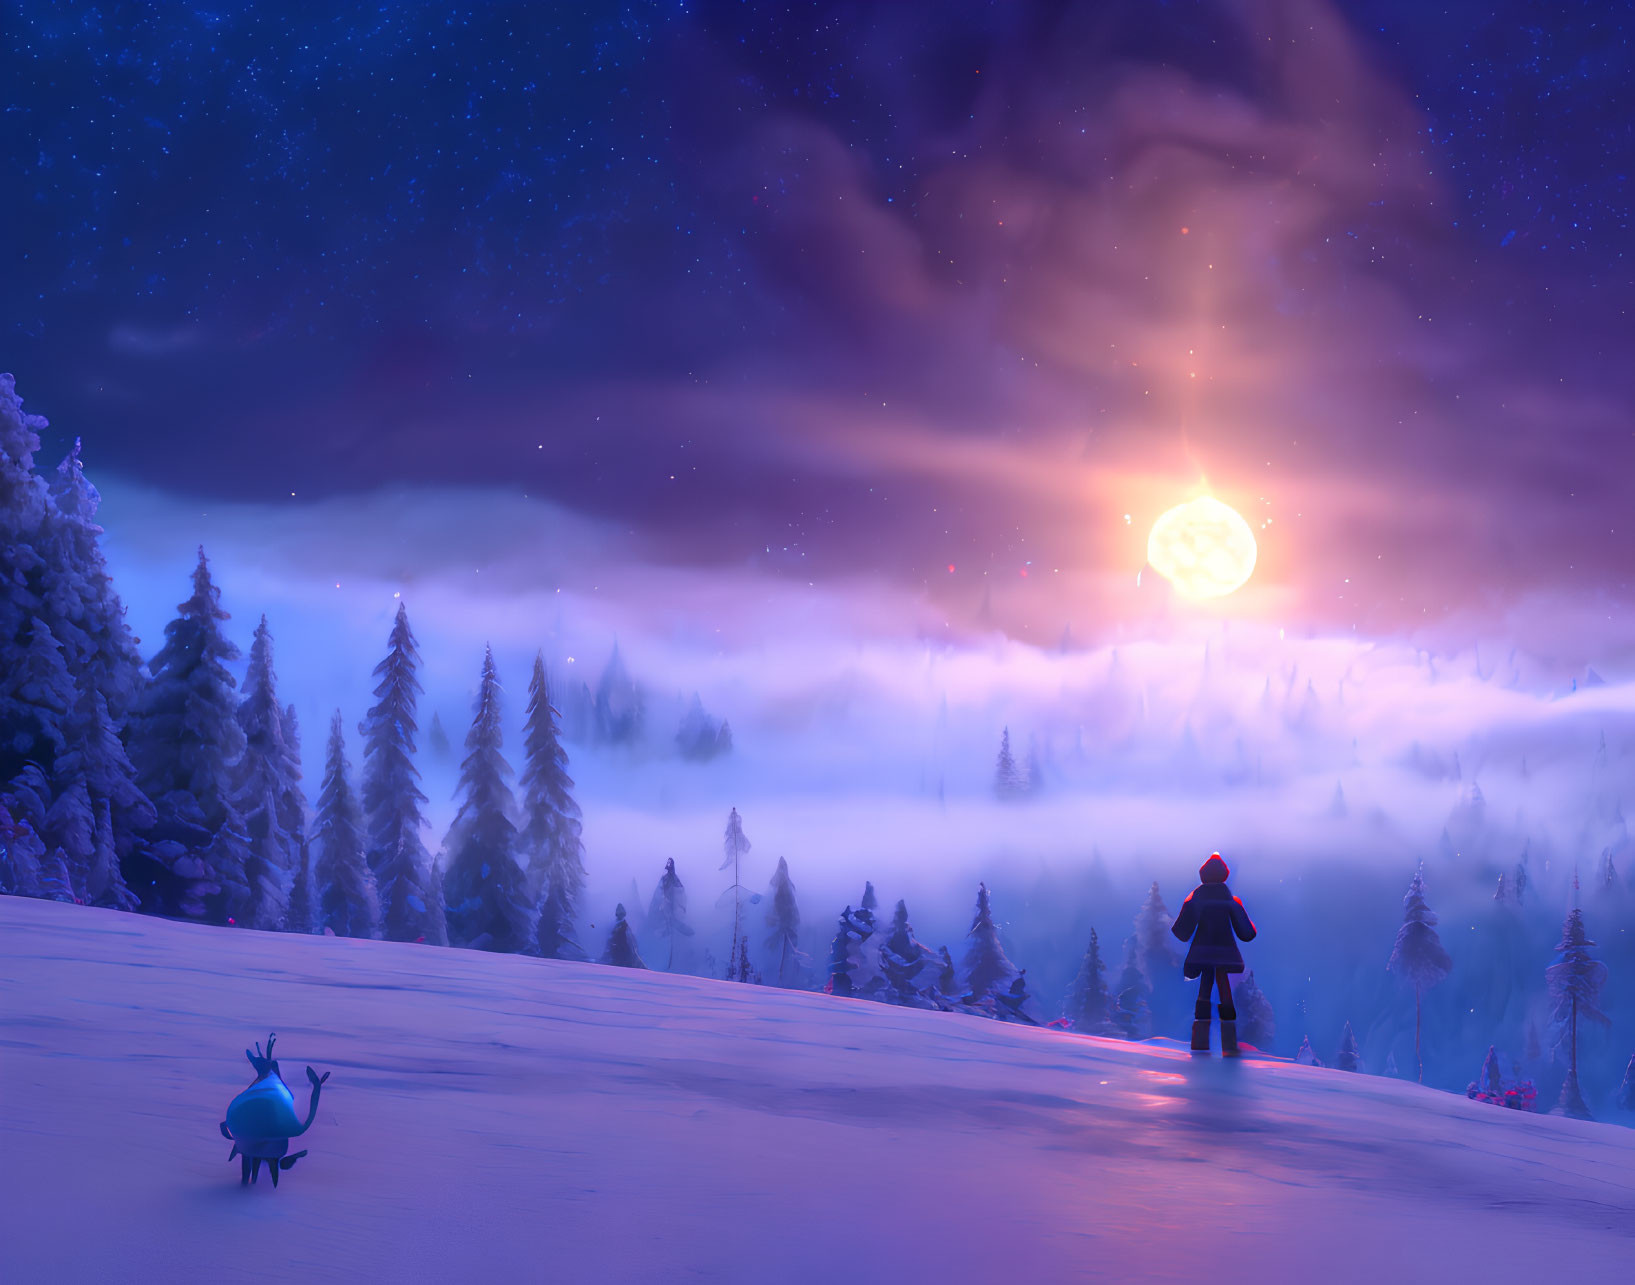 Person and creature on snowy hill under starry sky with celestial body